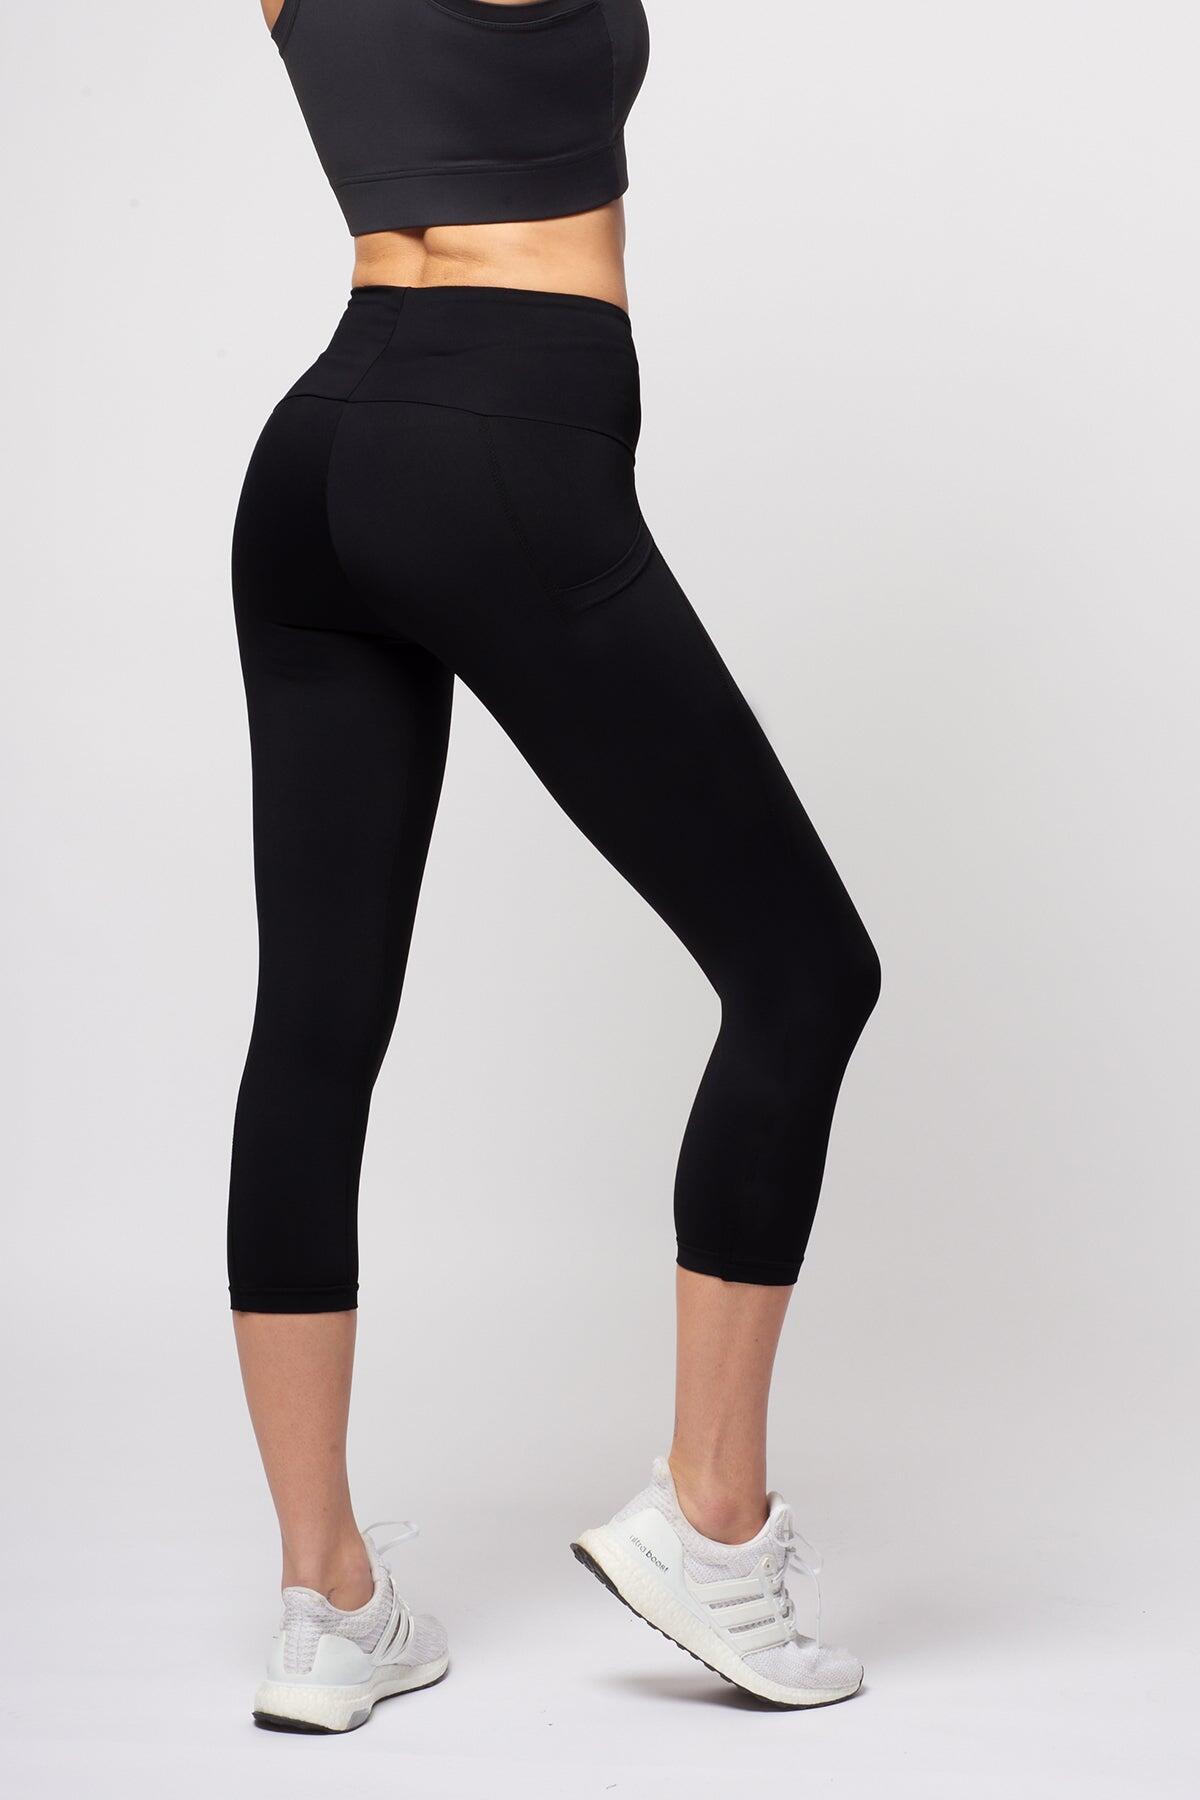 Extra Compression Cropped Leggings with Tummy Control and Side Pockets Black 3/4